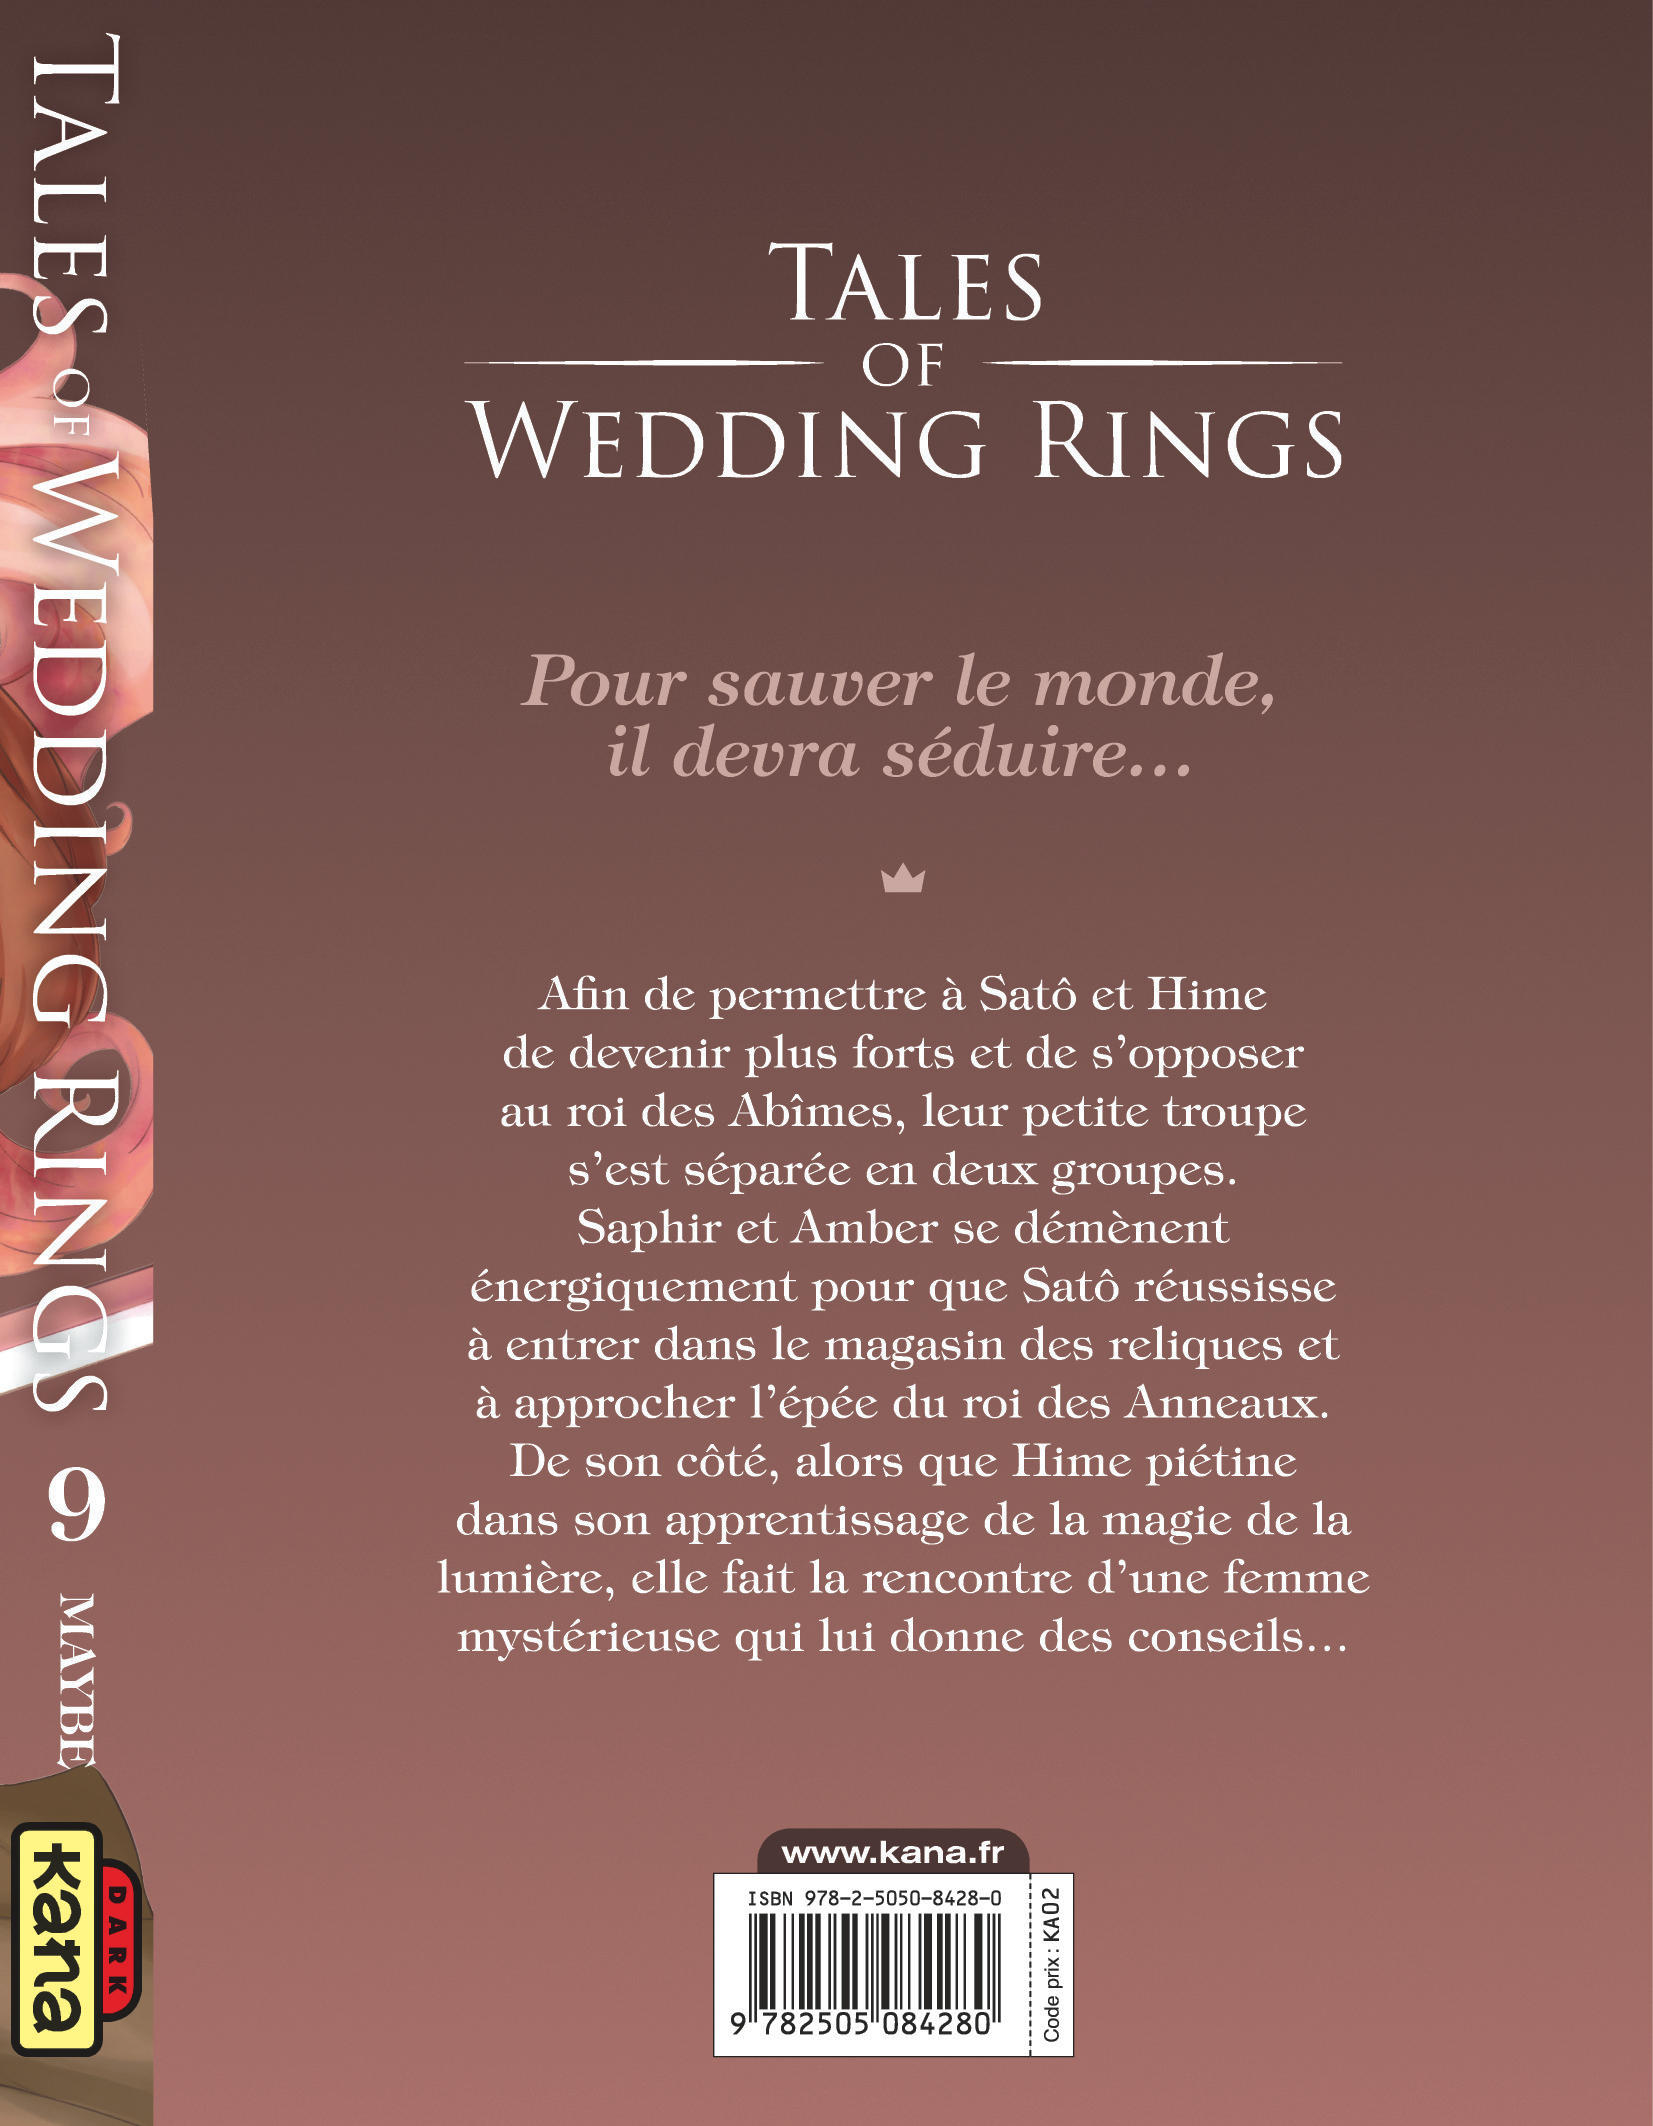 Tales of wedding rings – Tome 9 - 4eme